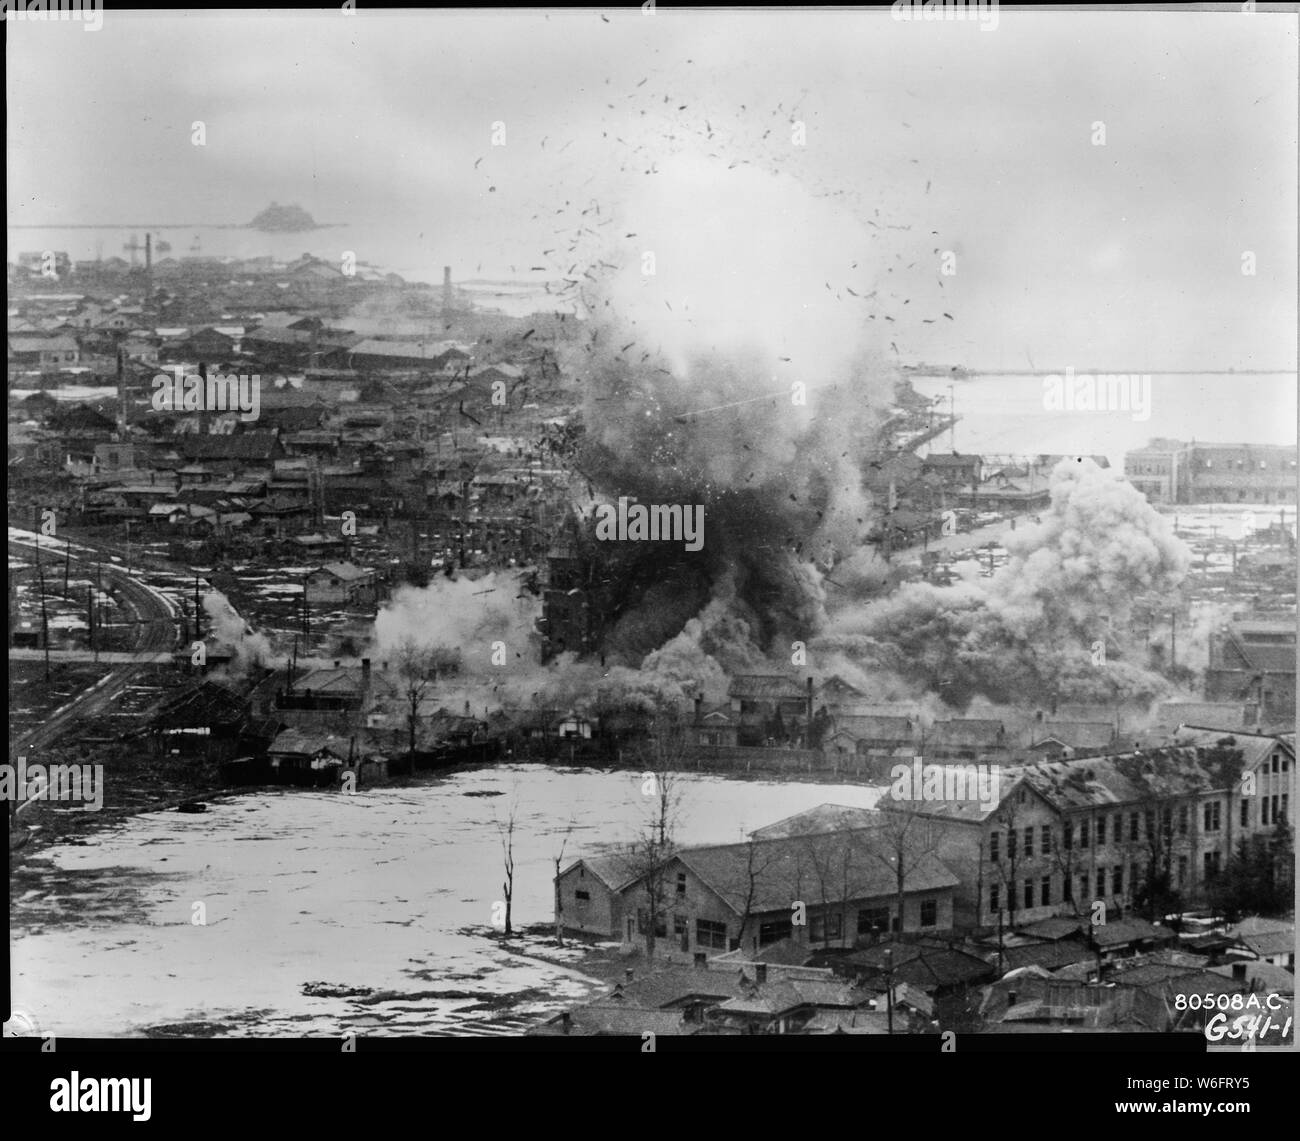 COSTLY VISIT. Immediate explosion from a direct hit made be a B-26 Invader light bomber on a church containing high explosives for the Communists, is shown in this photo the second after the 452nd Light Bomb Wing's plane had dropped its bombs directly on target. Wonsan harbor on the east coast of Korea is shown in the background, while buildings of the military supply area in the foreground are shown damaged in previous strikes. Stock Photo